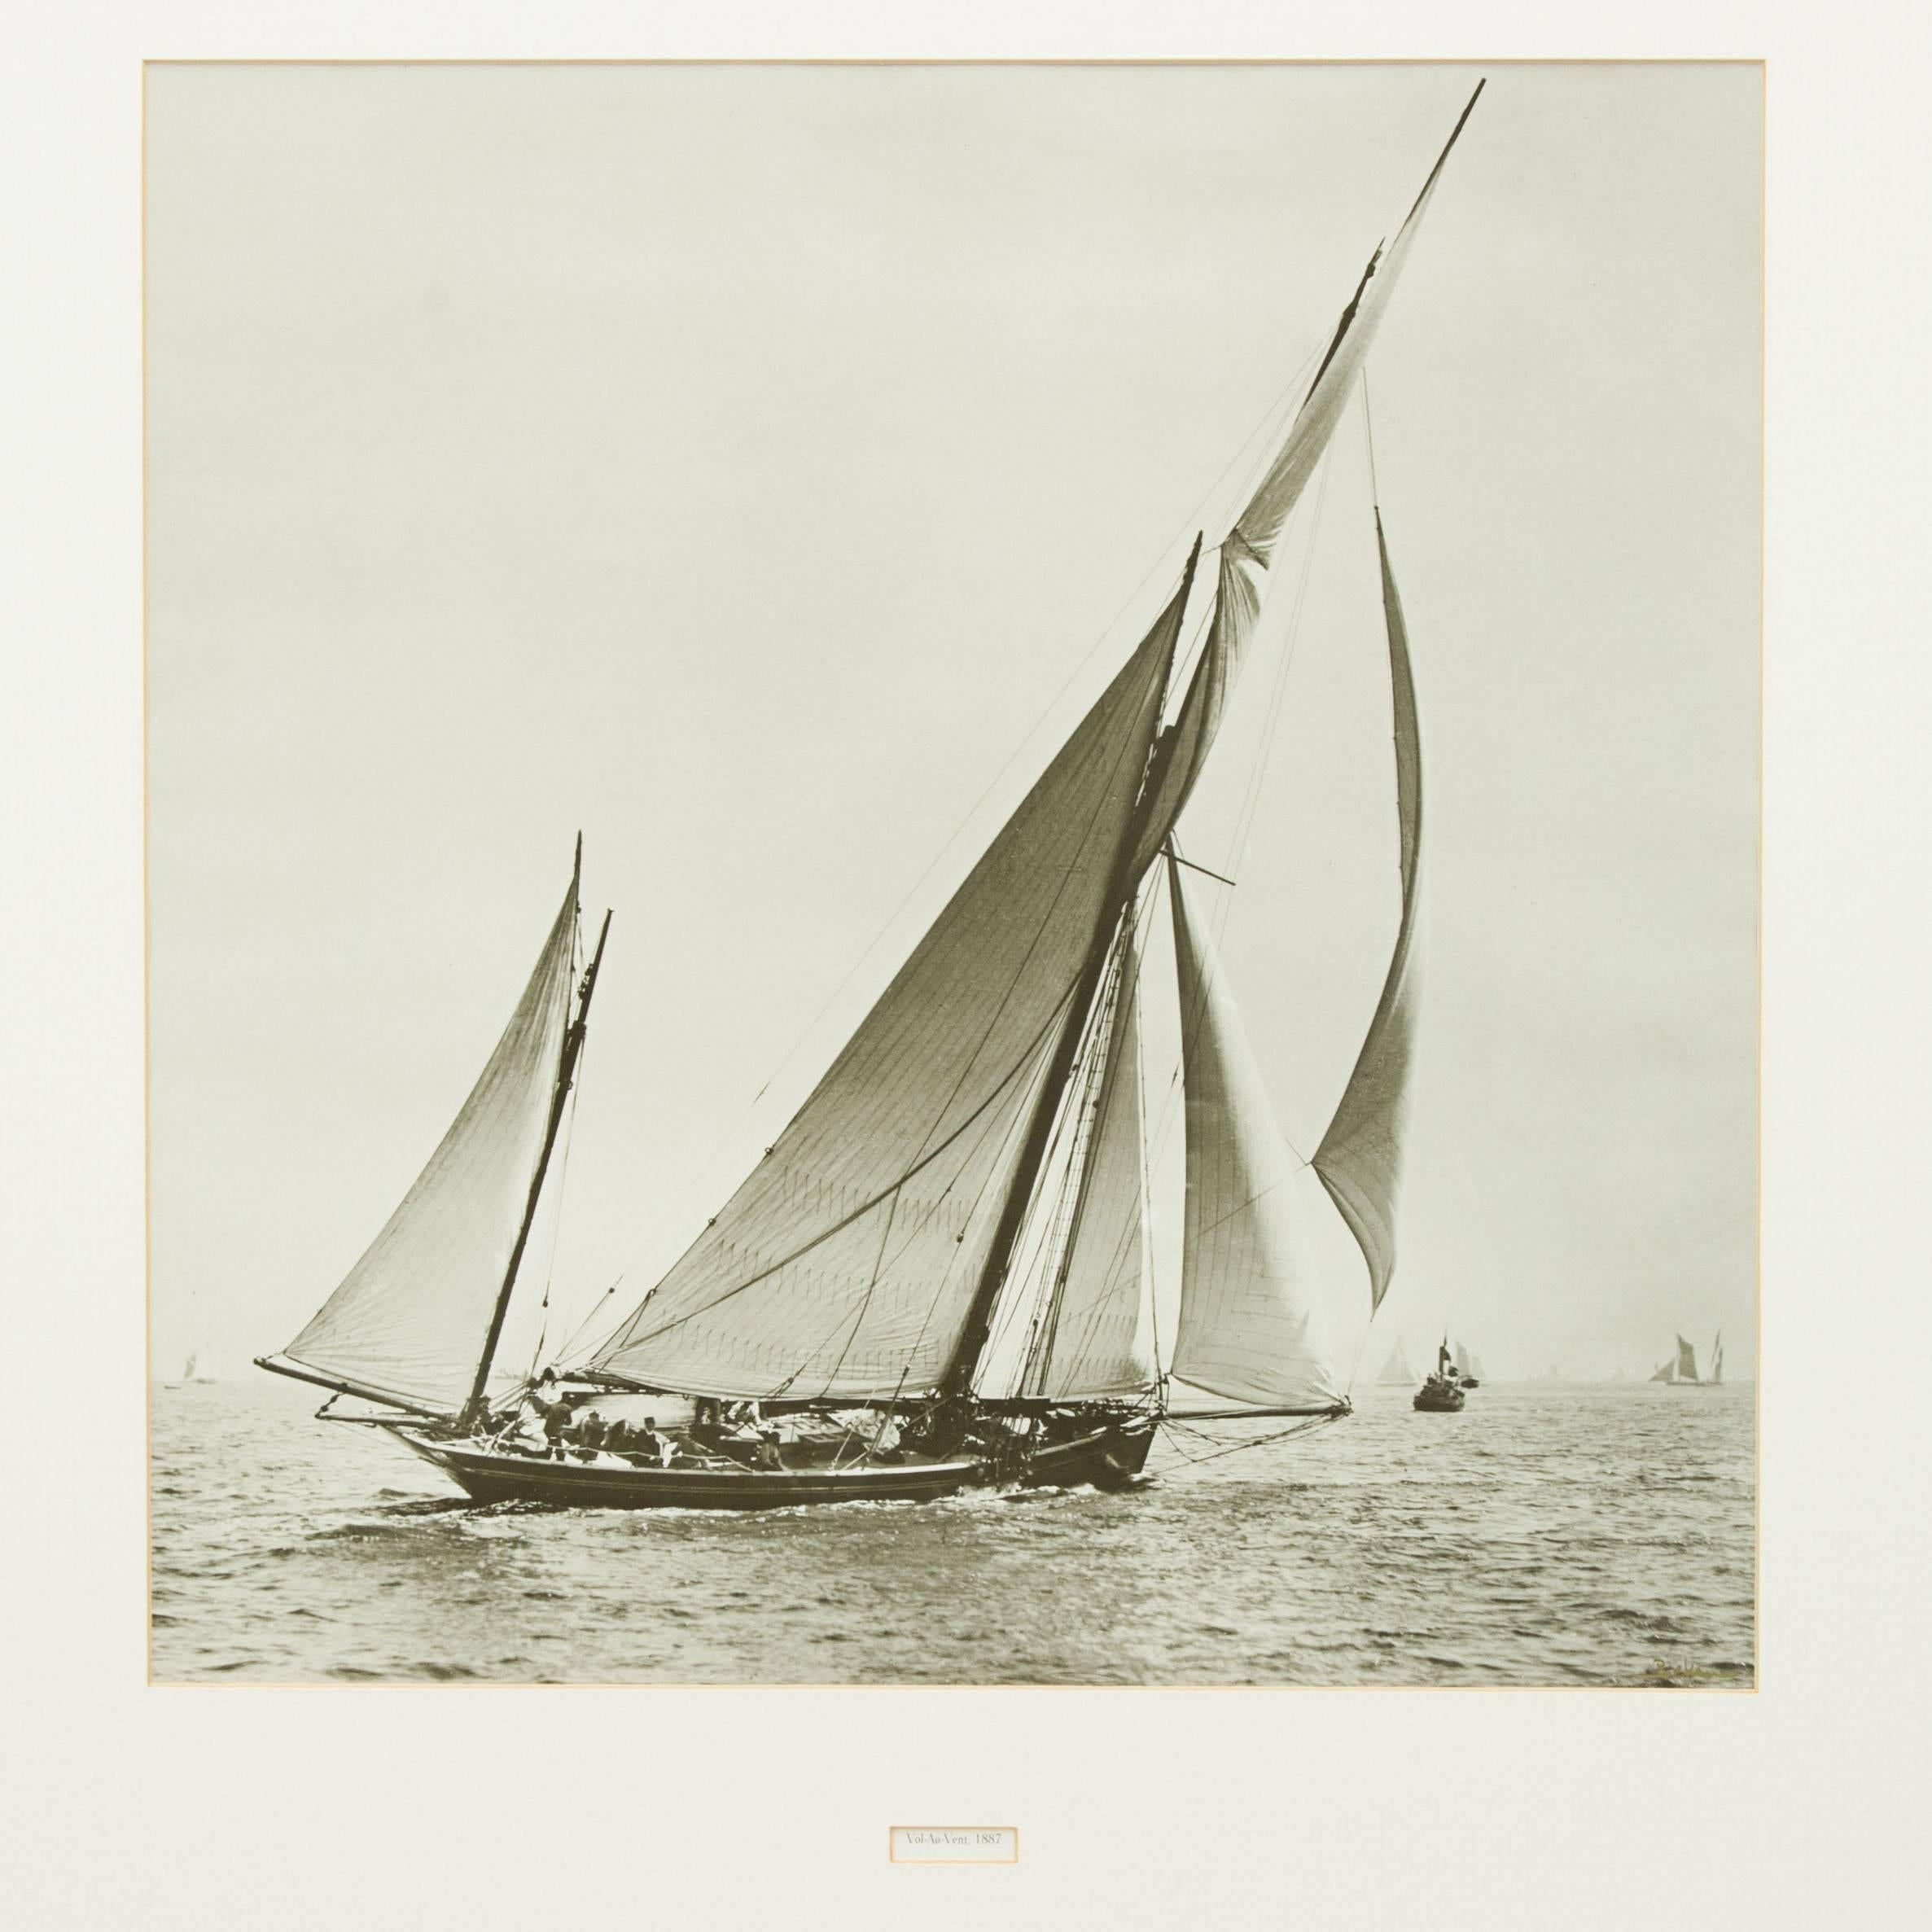 Yachting photograph Westward by Beken of Cowes. 
Framed black and white yachting photographic print titled 'Westward, 1920' with a printed 'Beken' signature in the bottom right hand corner. The title is hidden under the mount, the image printed on